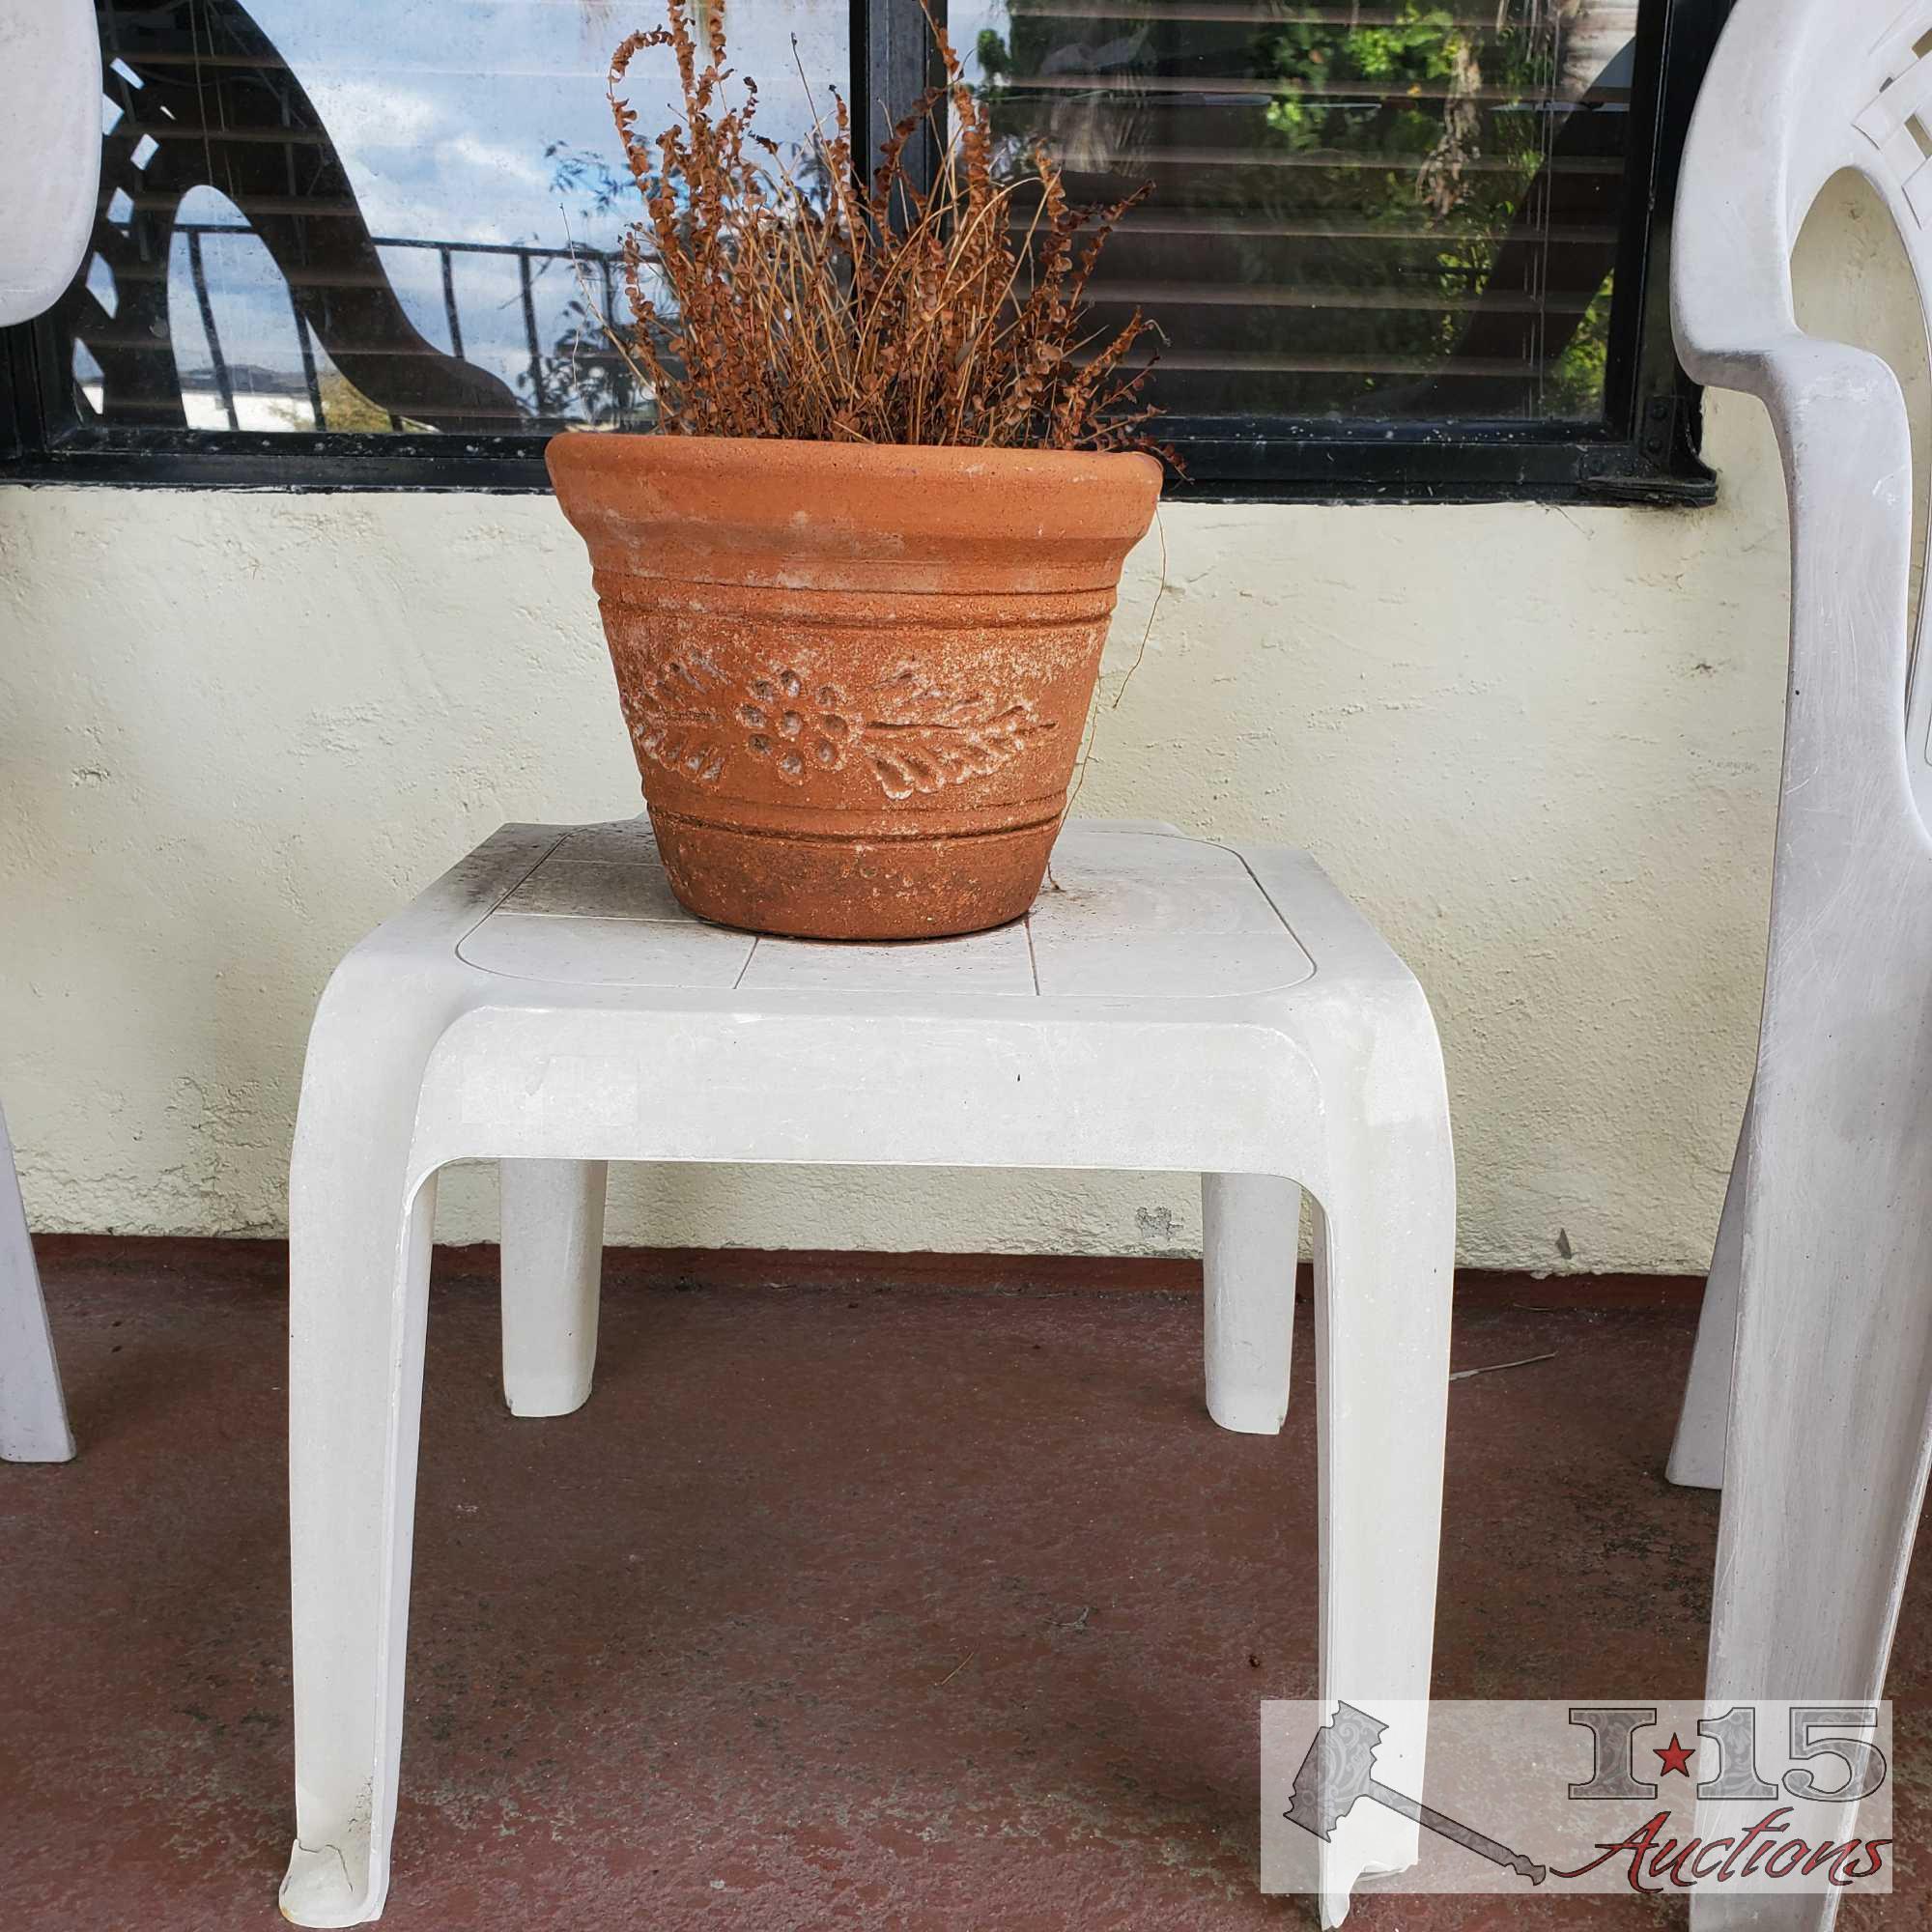 3 White Plastic Chairs, End Table and Pottery